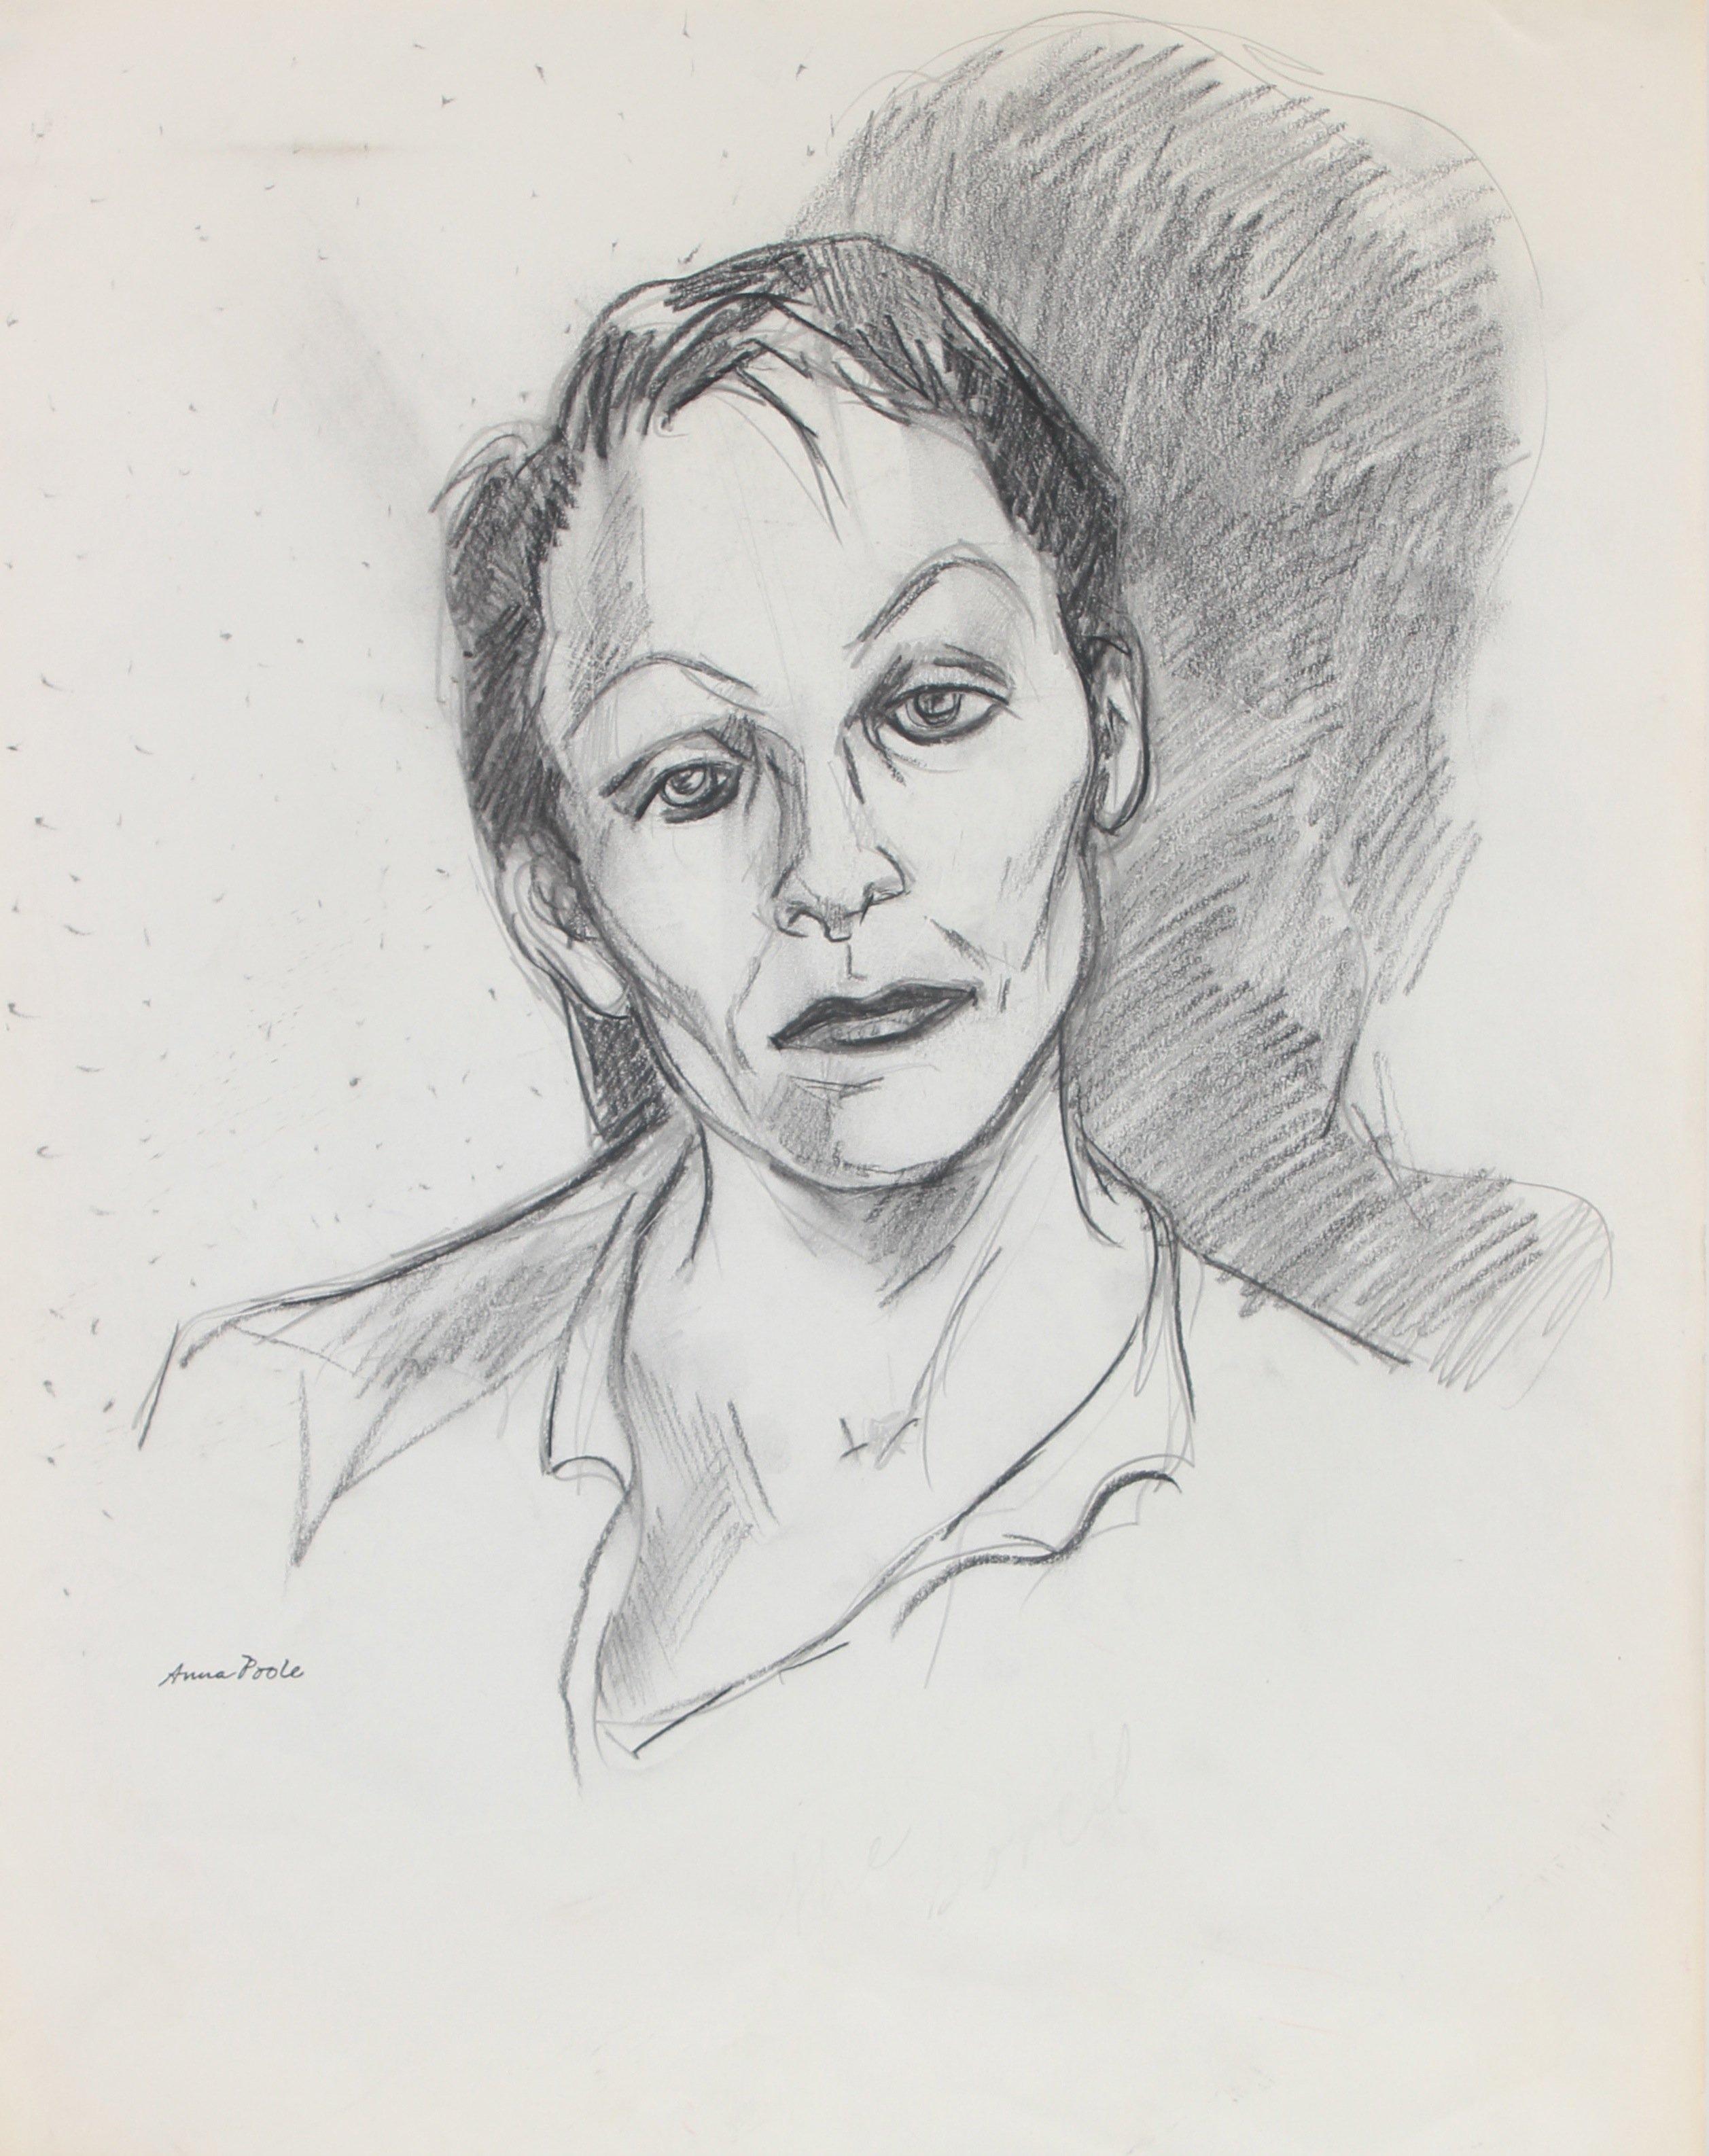 Anna Poole Figurative Art - "The Bored" Late 20th Century Charcoal and Graphite Portrait Drawing